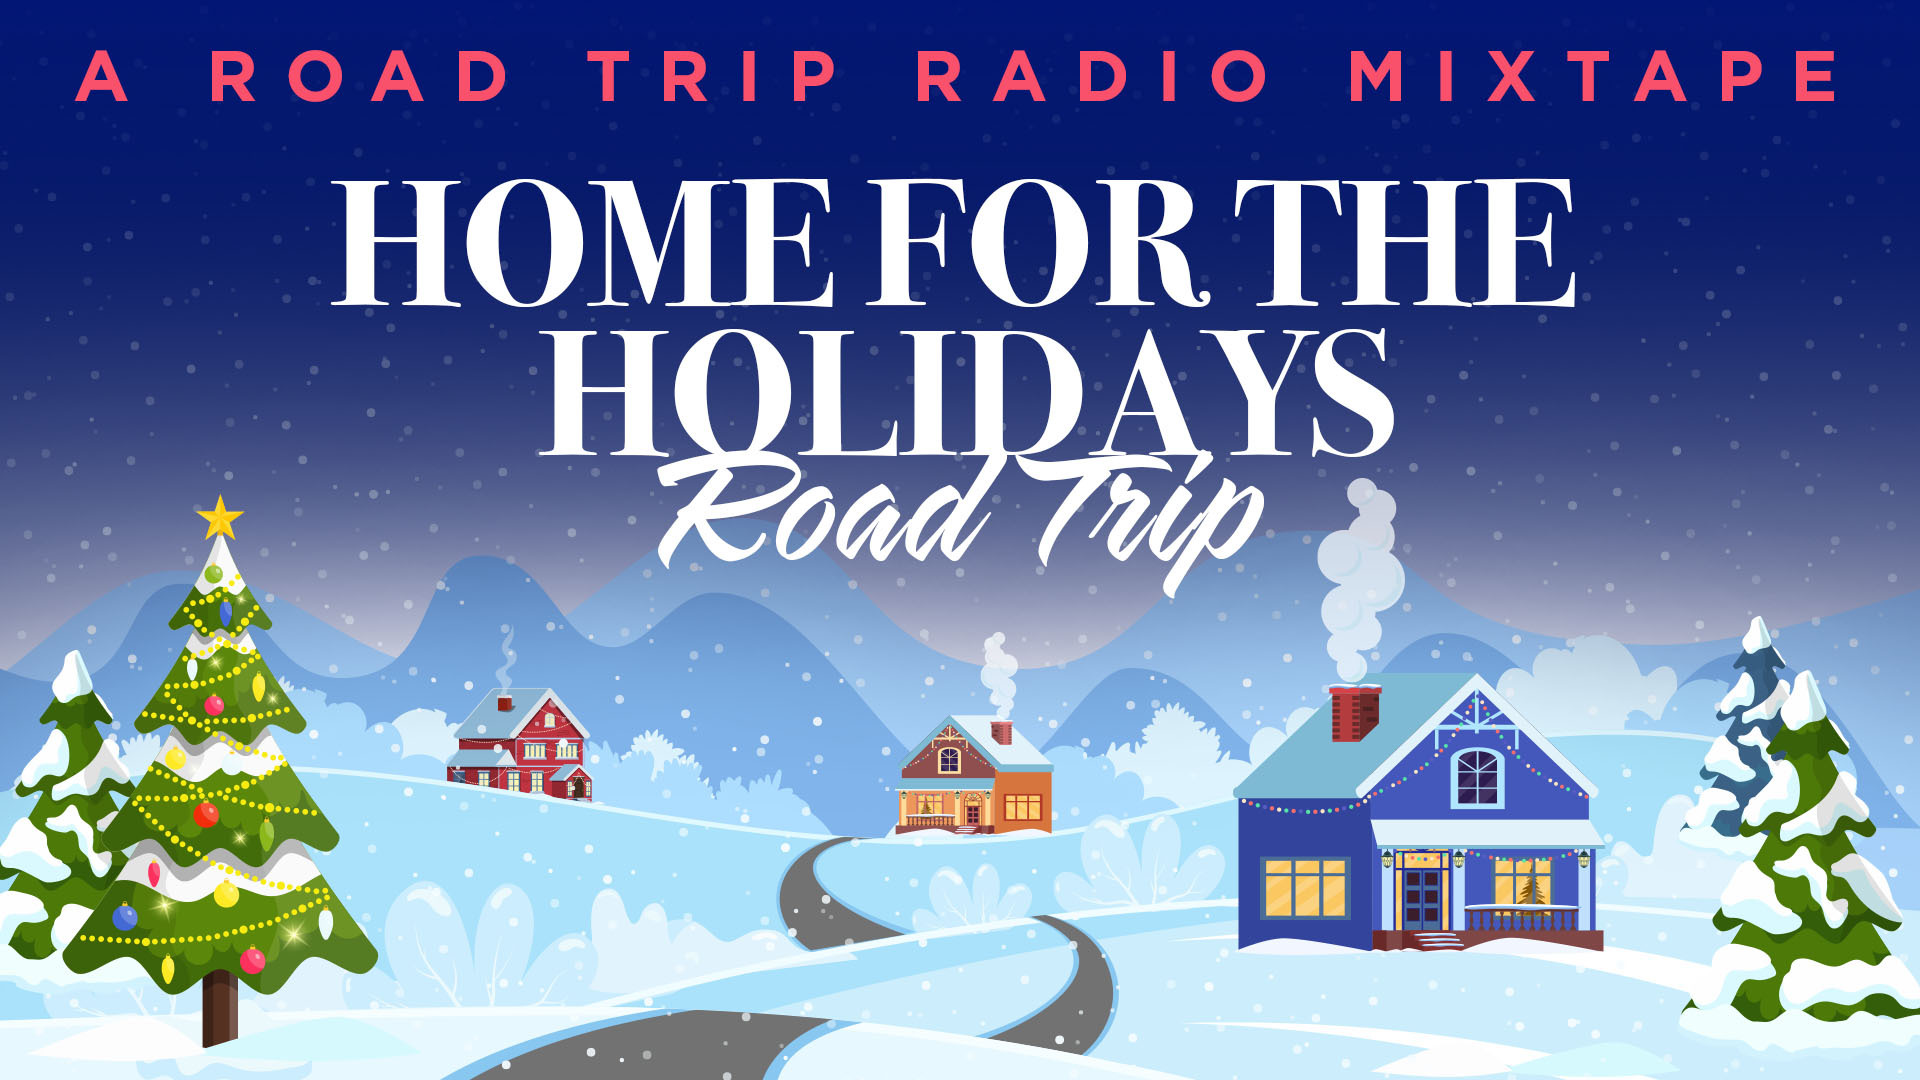 Road Trip Radio Mixtape Home for the Holidays